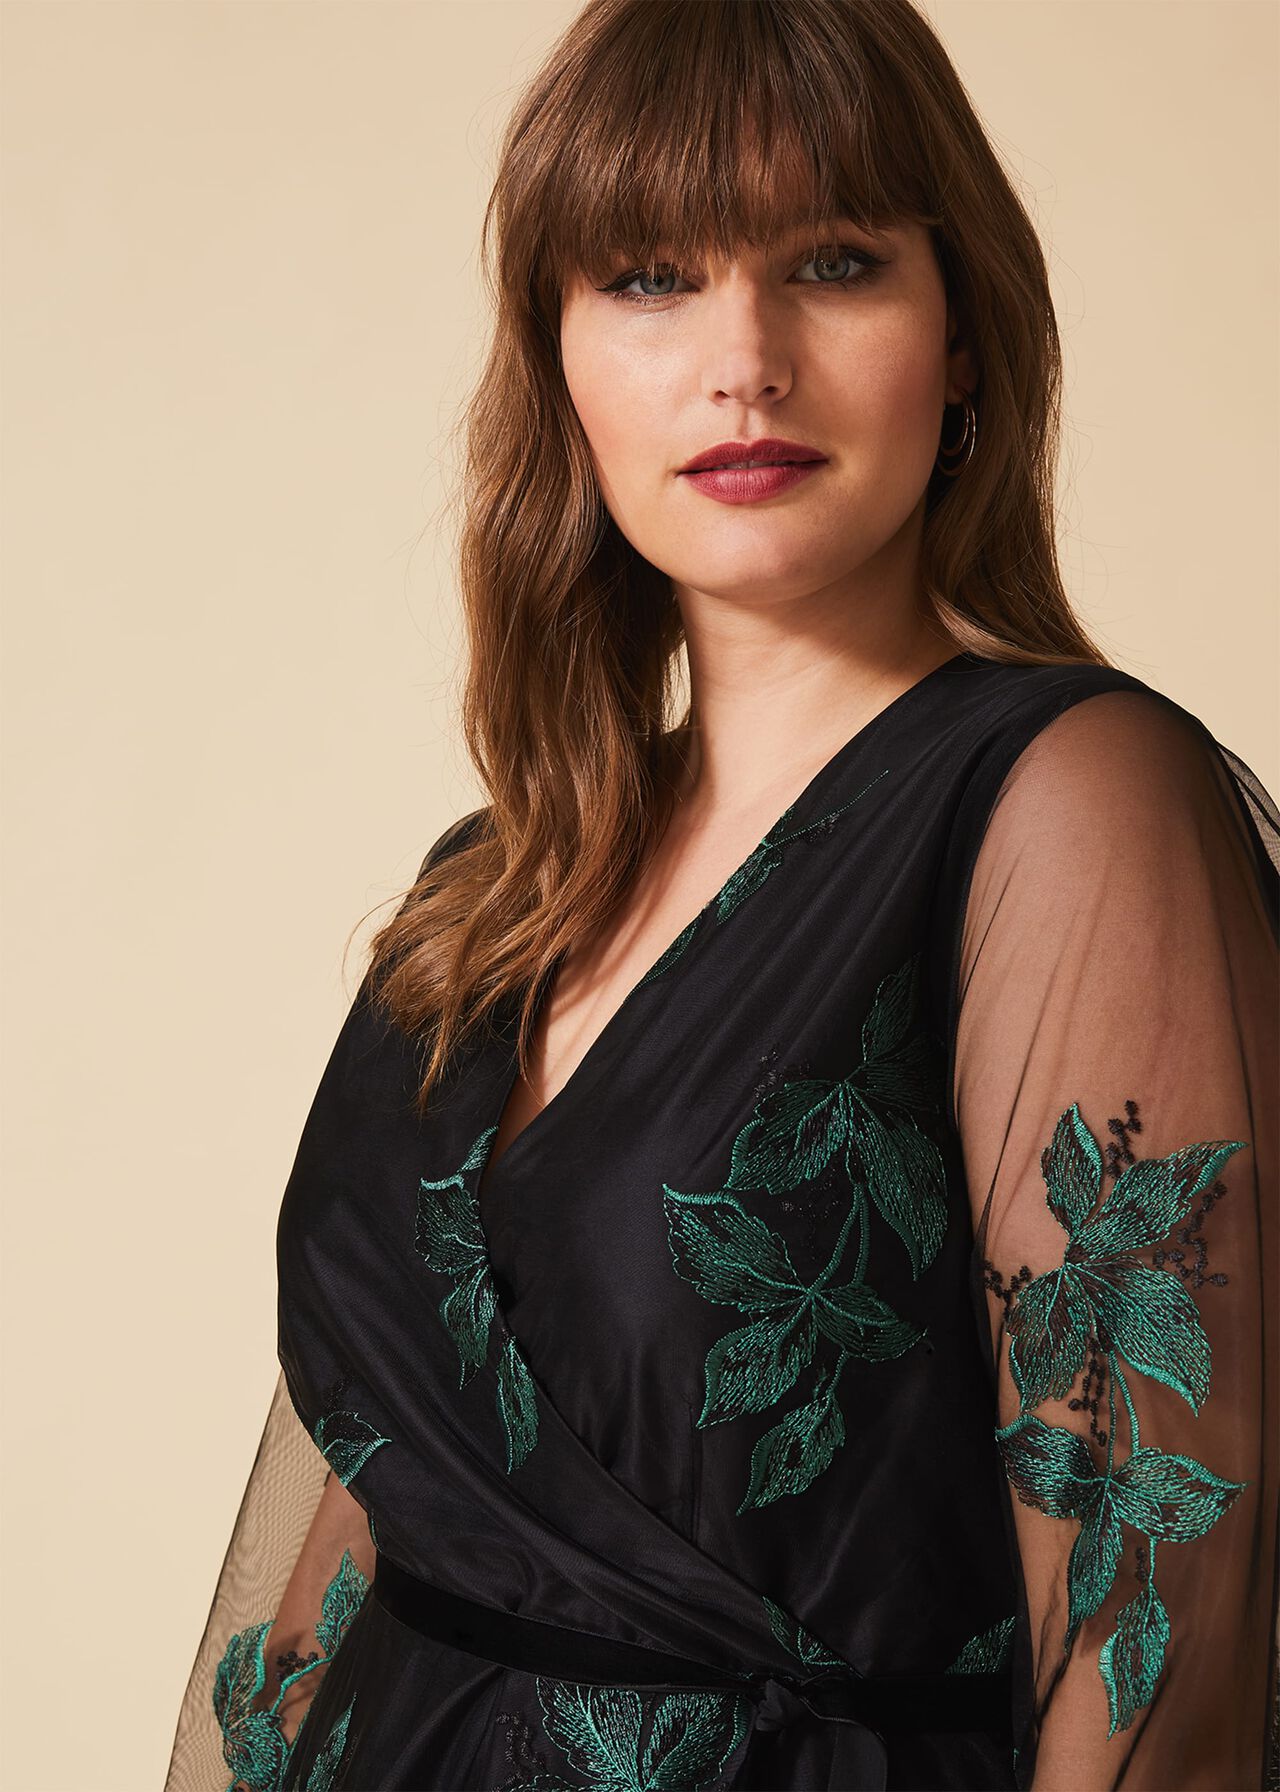 Lucille Embroidered Dress